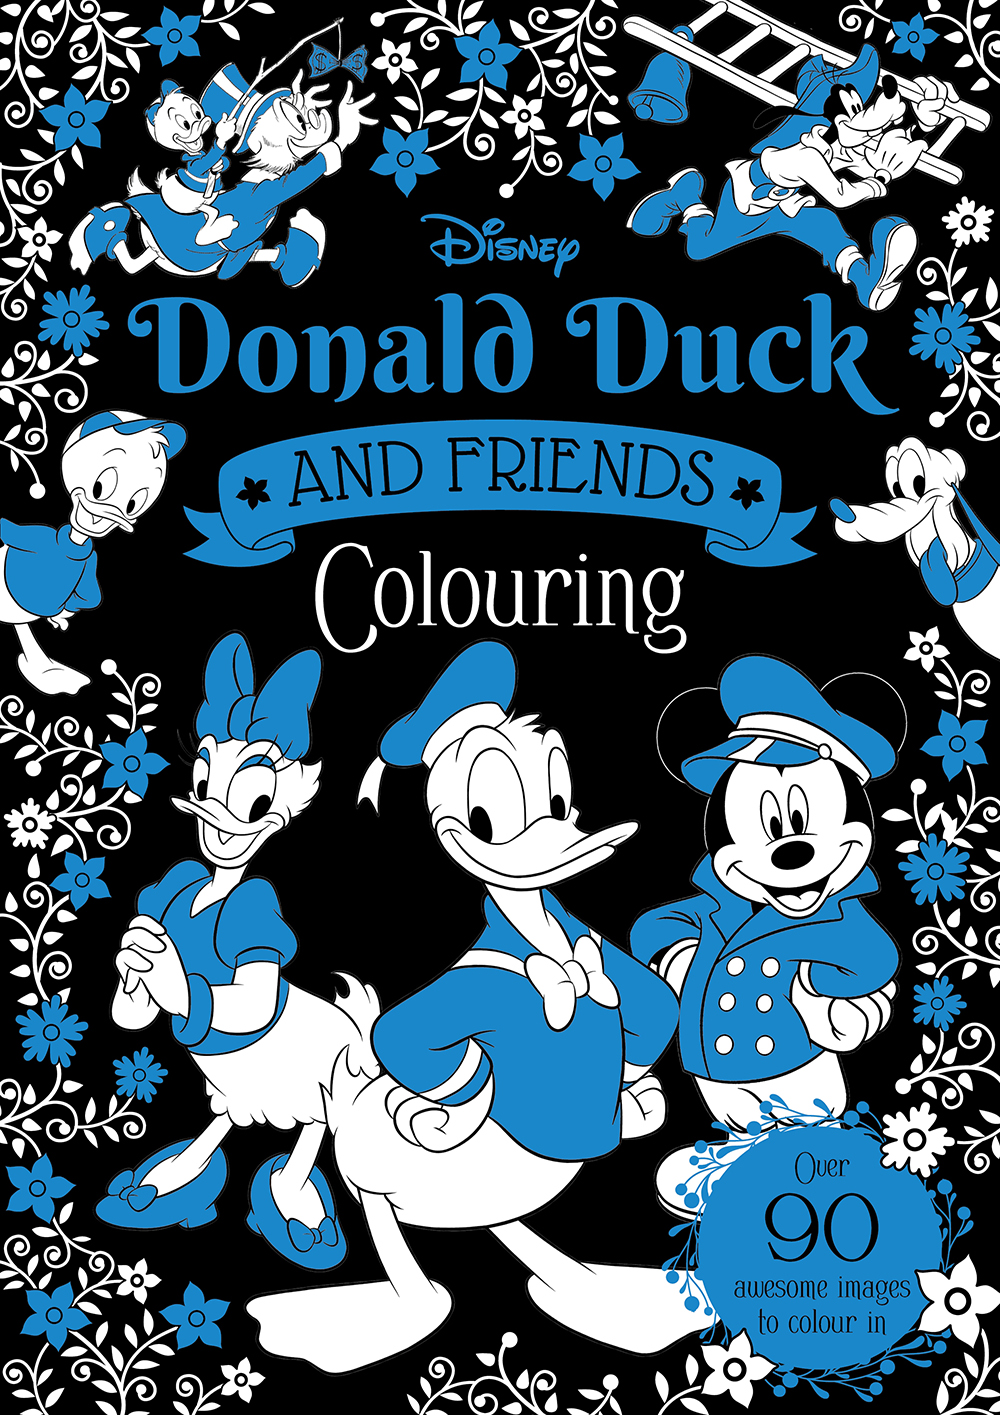 Donald duck and friends